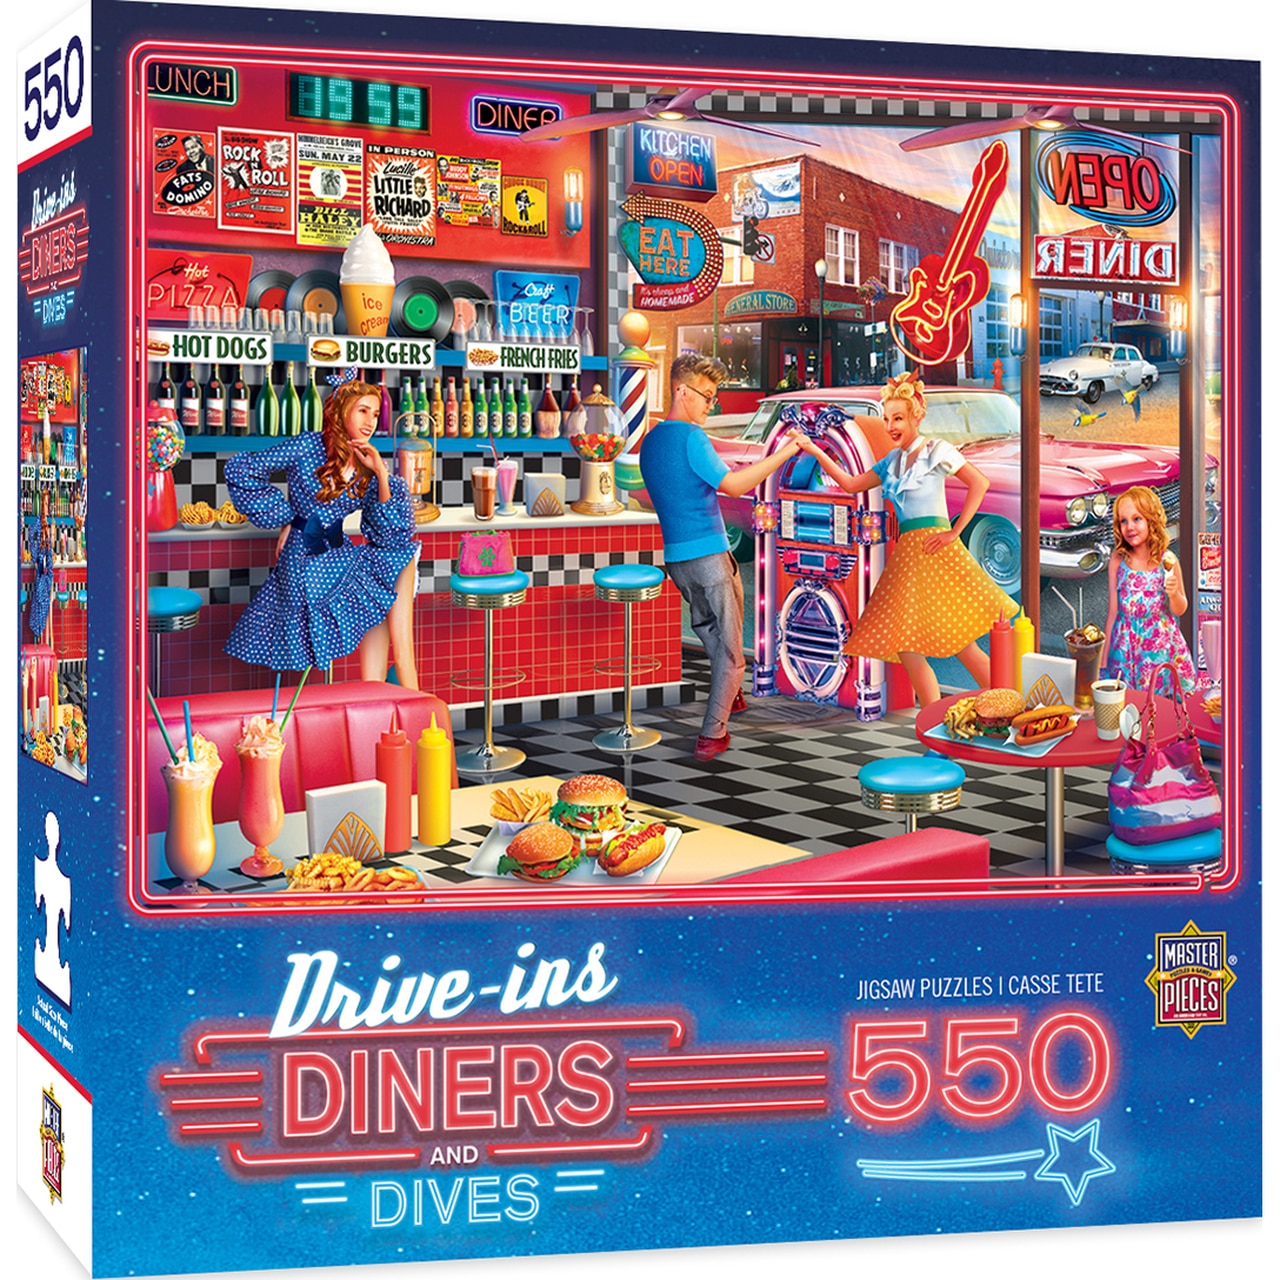 Drive-Ins, Diners and Dives - Good Times Diner 550pc Puzzle b y Masterpieces # 31930